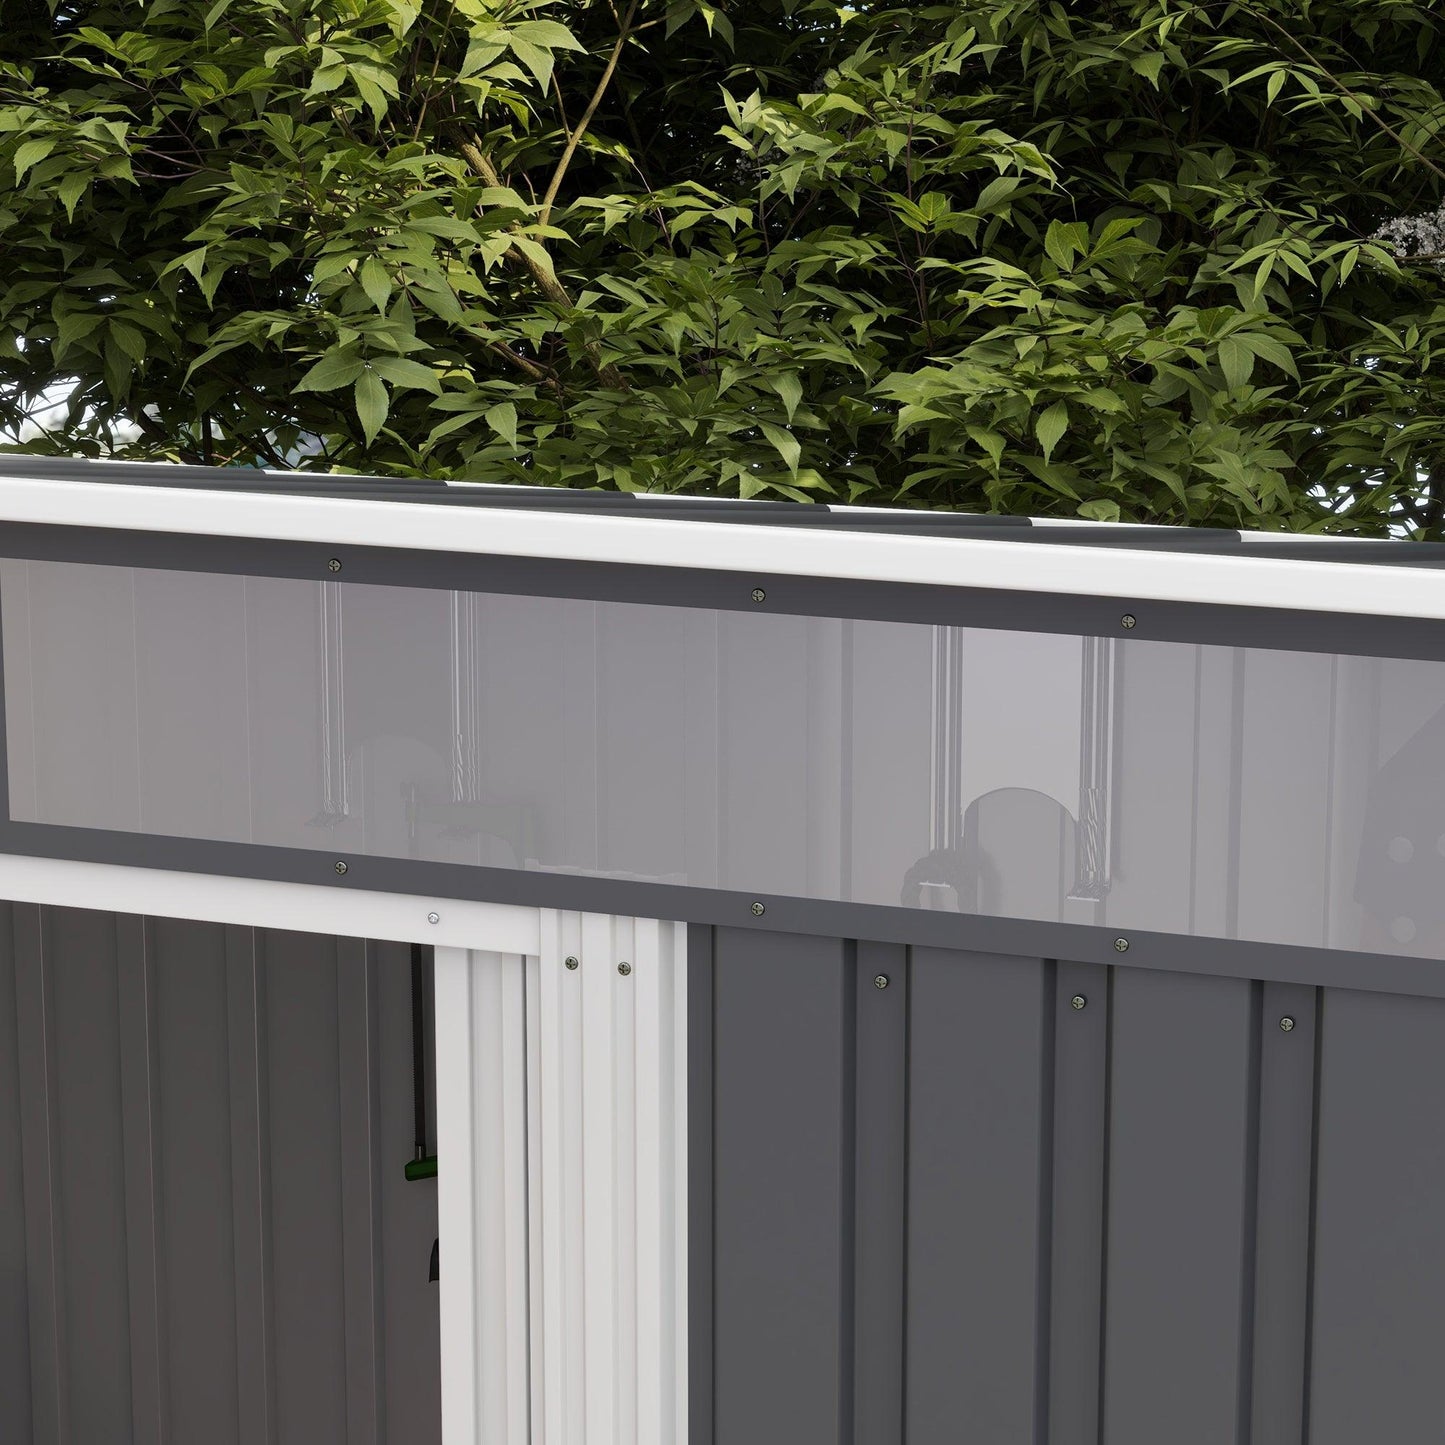 Outsunny 6.5 x 4FT Galvanised Metal Shed with Foundation, Lockable Tool Garden Shed with Double Sliding Doors and 2 Vents, Grey - ALL4U RETAILER LTD